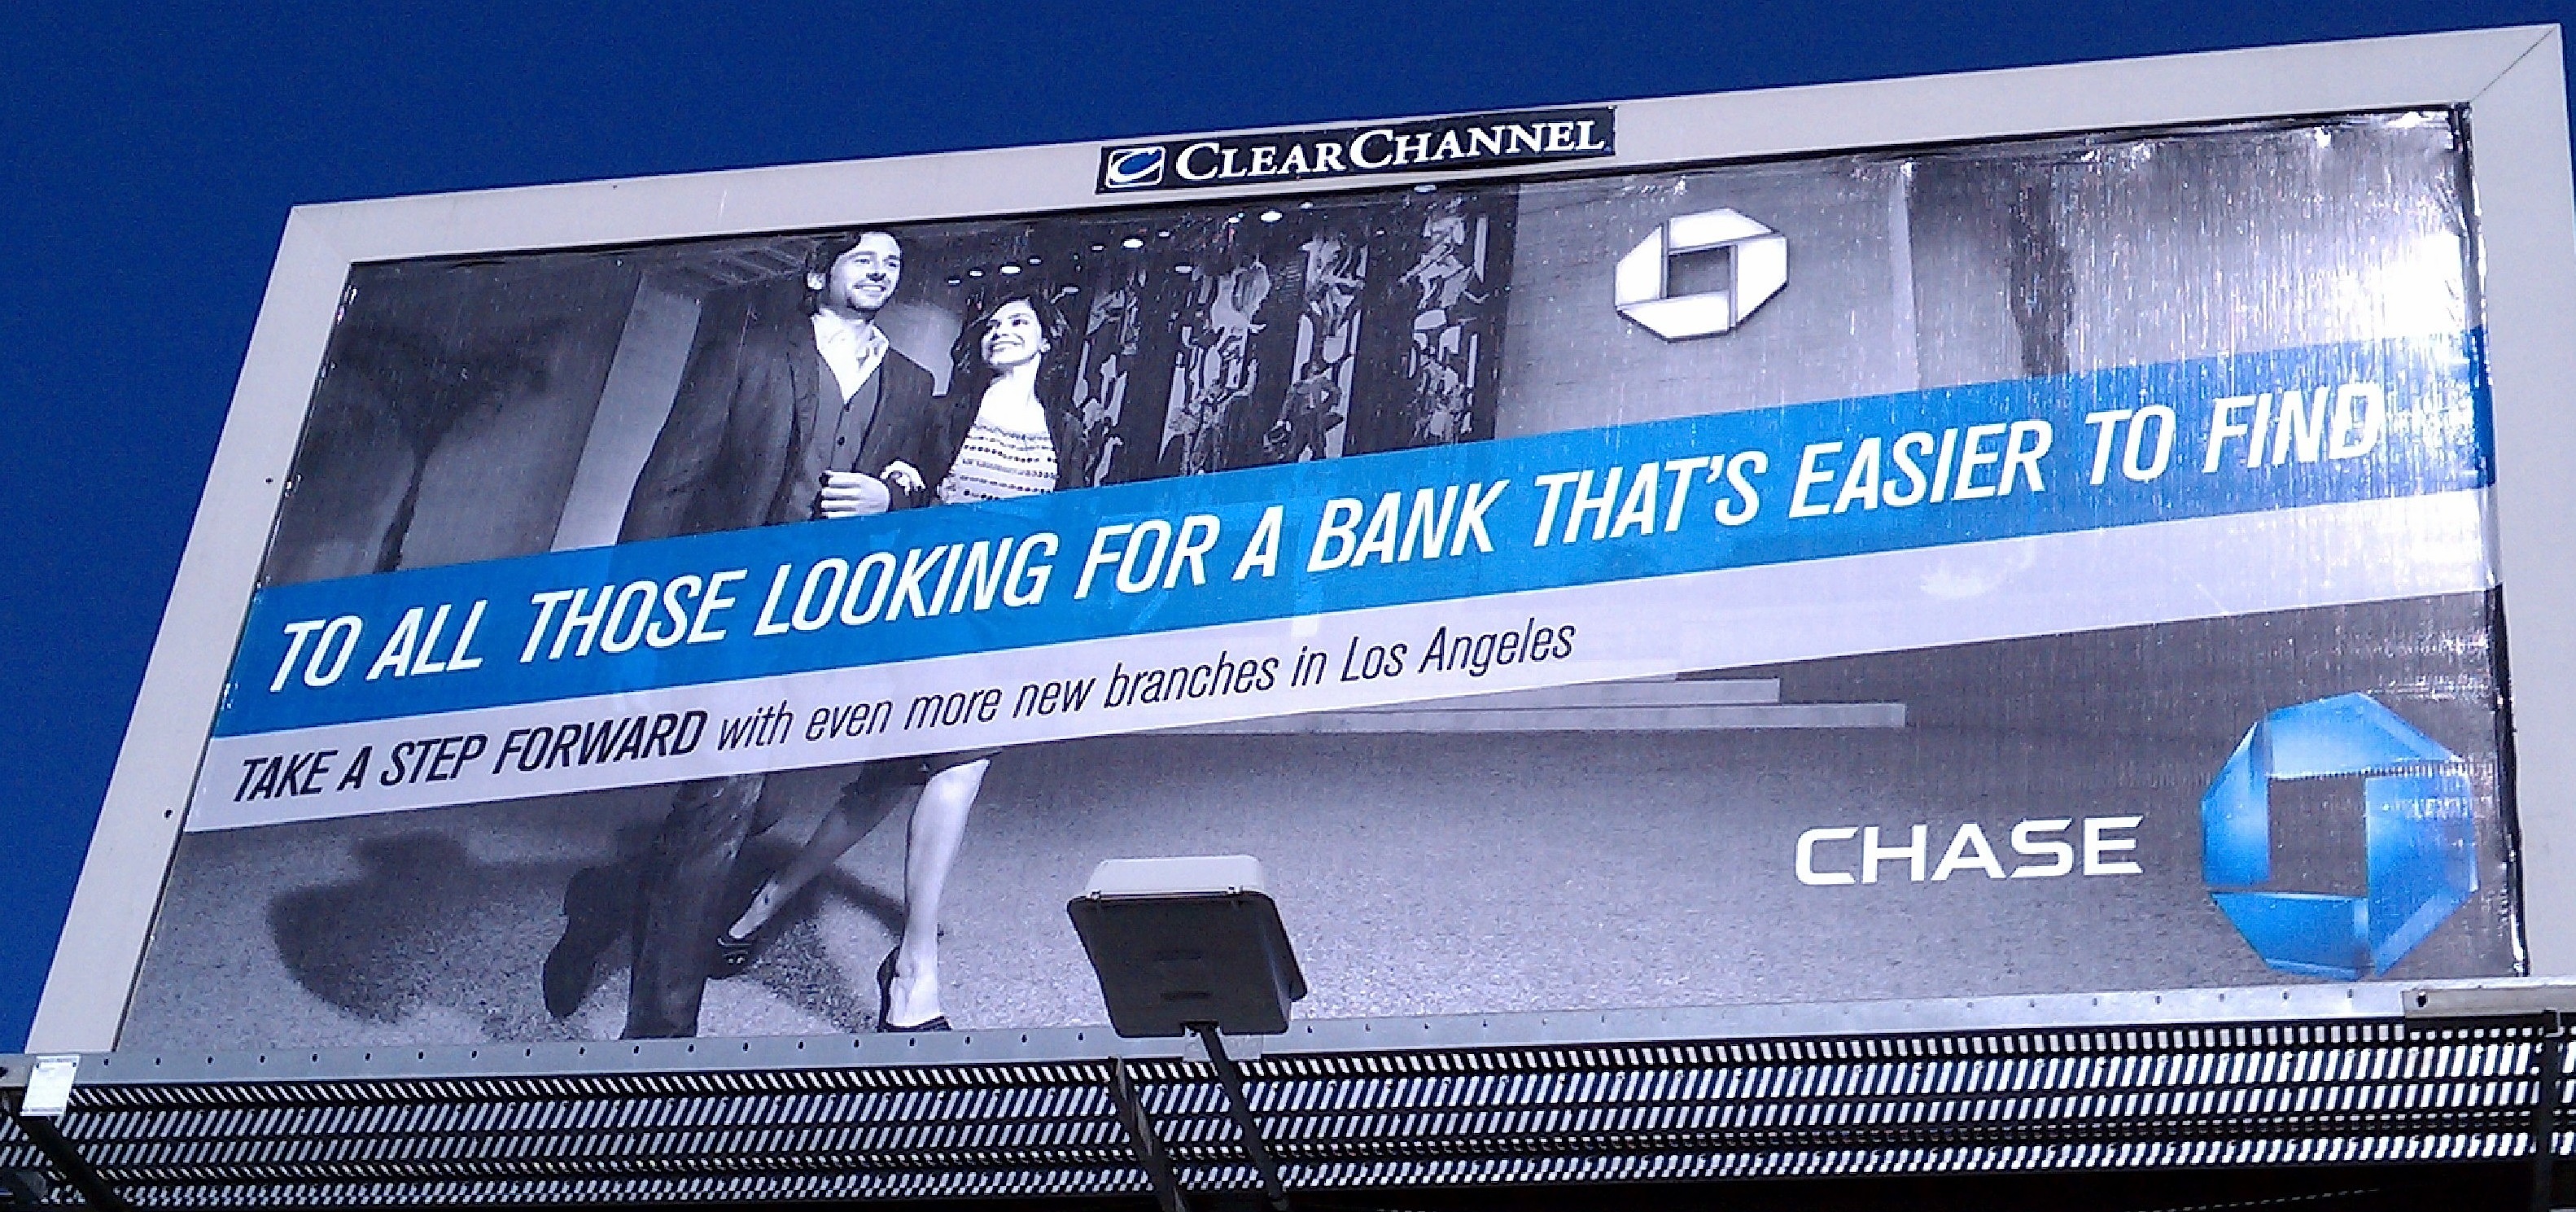 Chase billboard, May 2011, showing Sunset and Vine branch